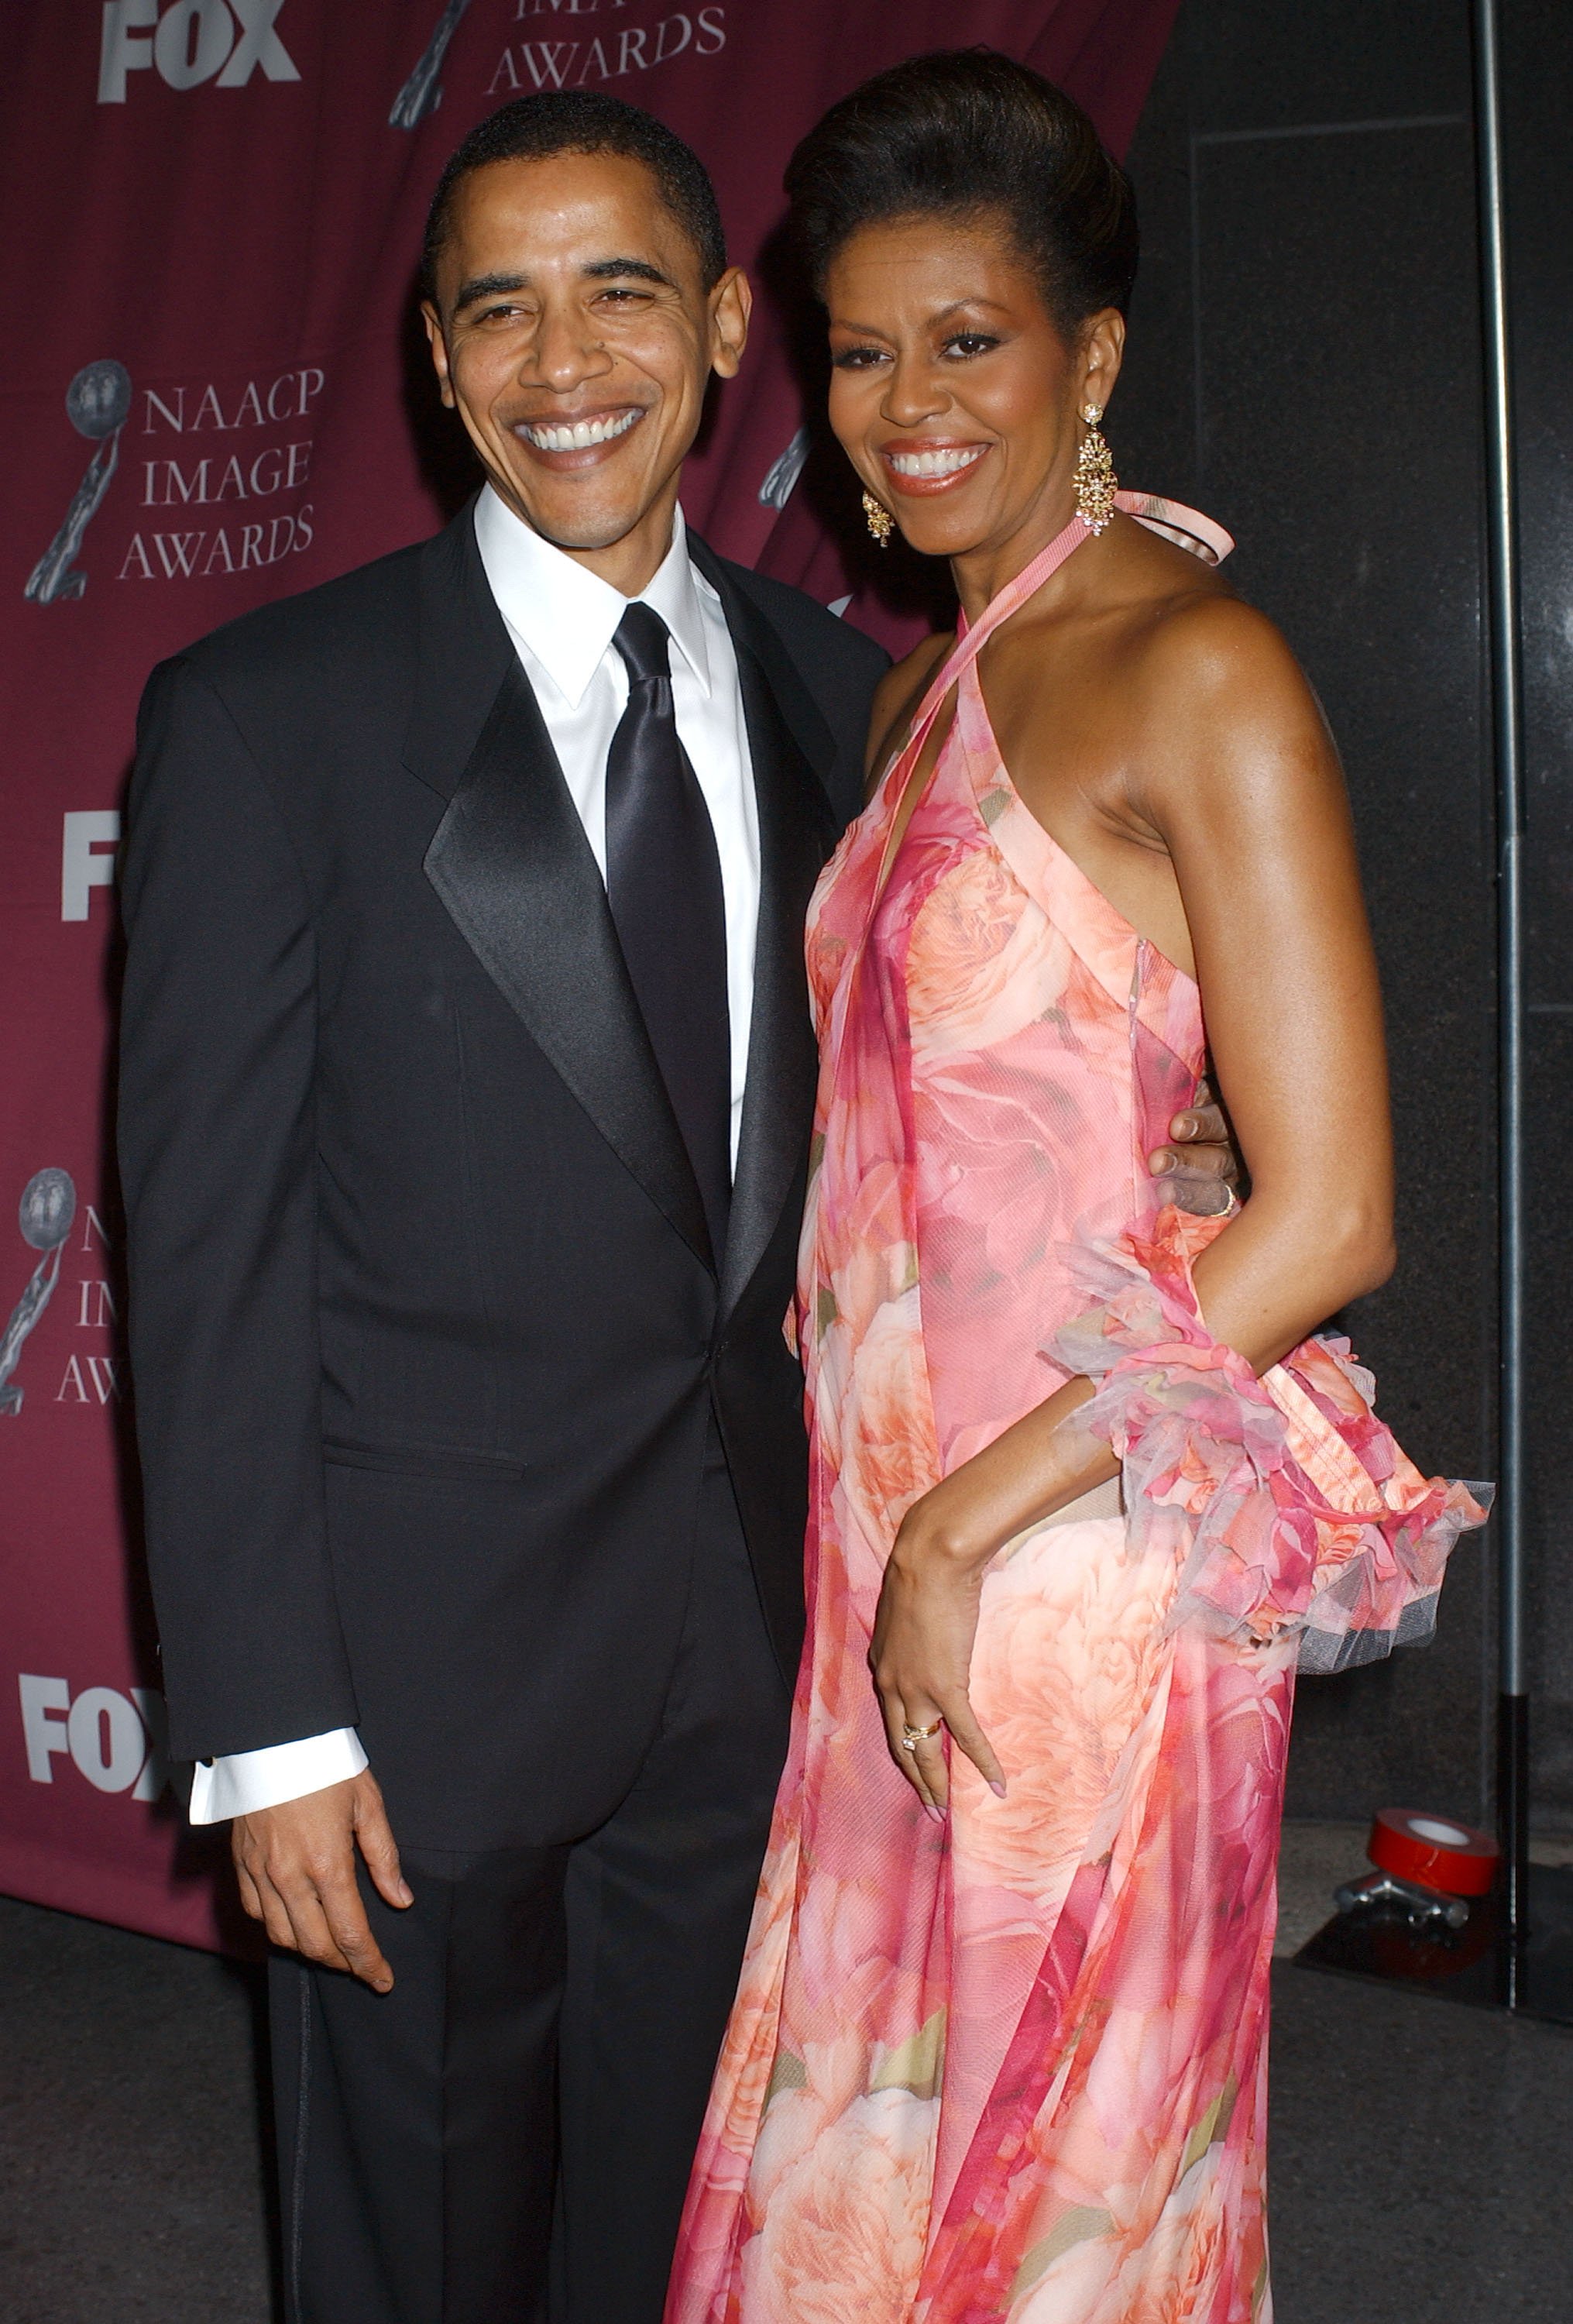 Barack Obama and Michelle Obama during The 36th Annual NAACP Image Awards - Arrivals at Dorothy Chandler Pavilion in Los Angeles, California, United States. March 19, 2005 | Source: Getty Images 